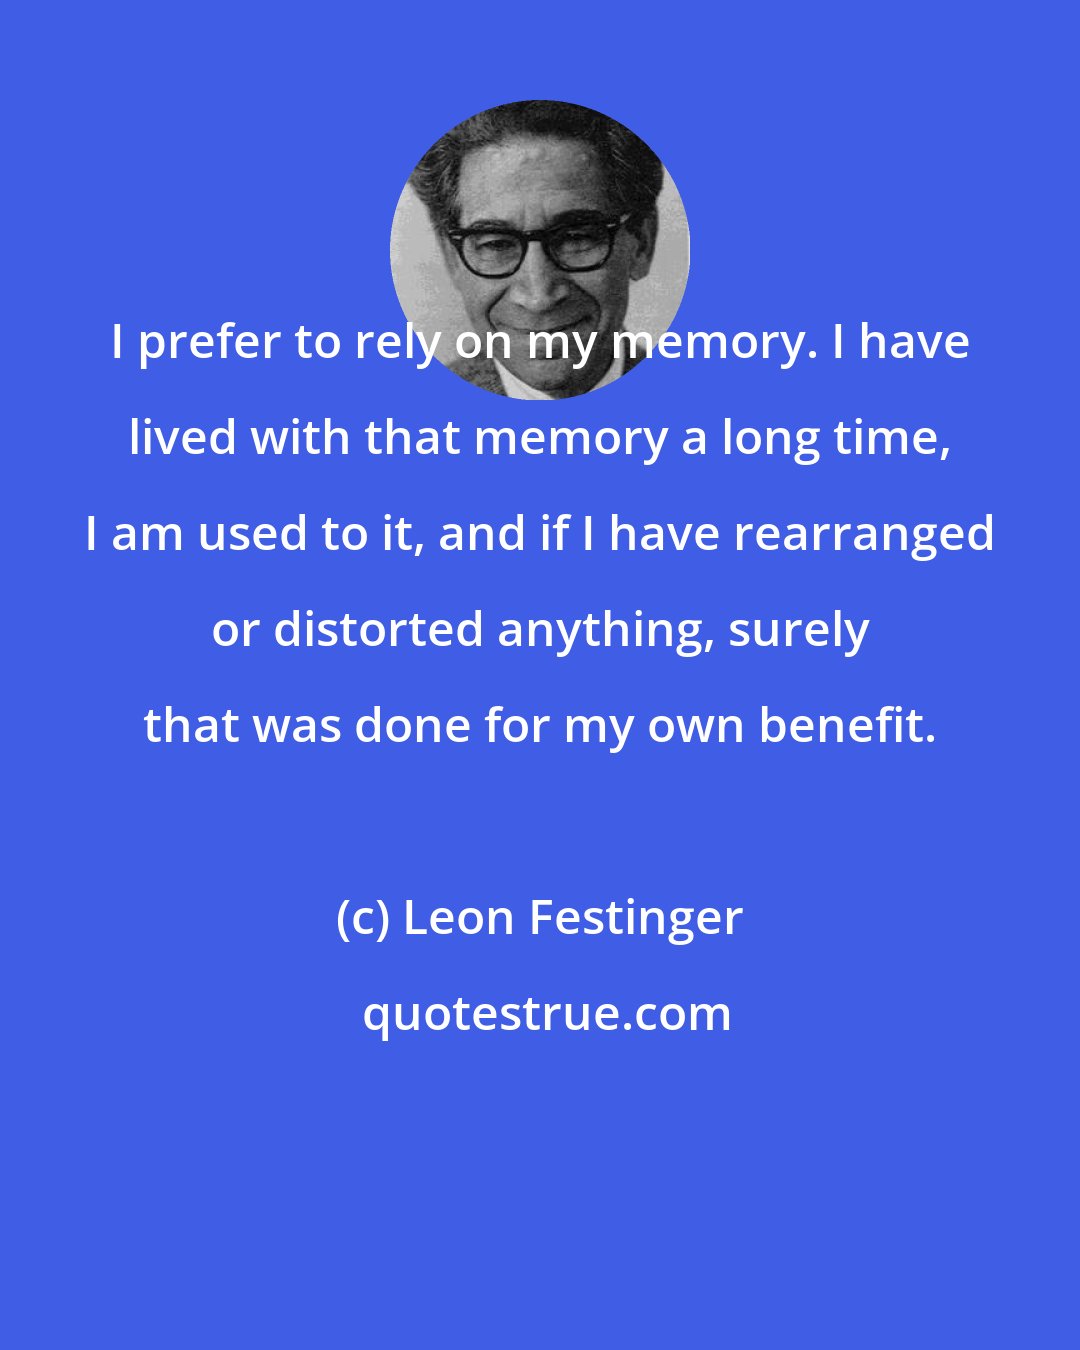 Leon Festinger: I prefer to rely on my memory. I have lived with that memory a long time, I am used to it, and if I have rearranged or distorted anything, surely that was done for my own benefit.